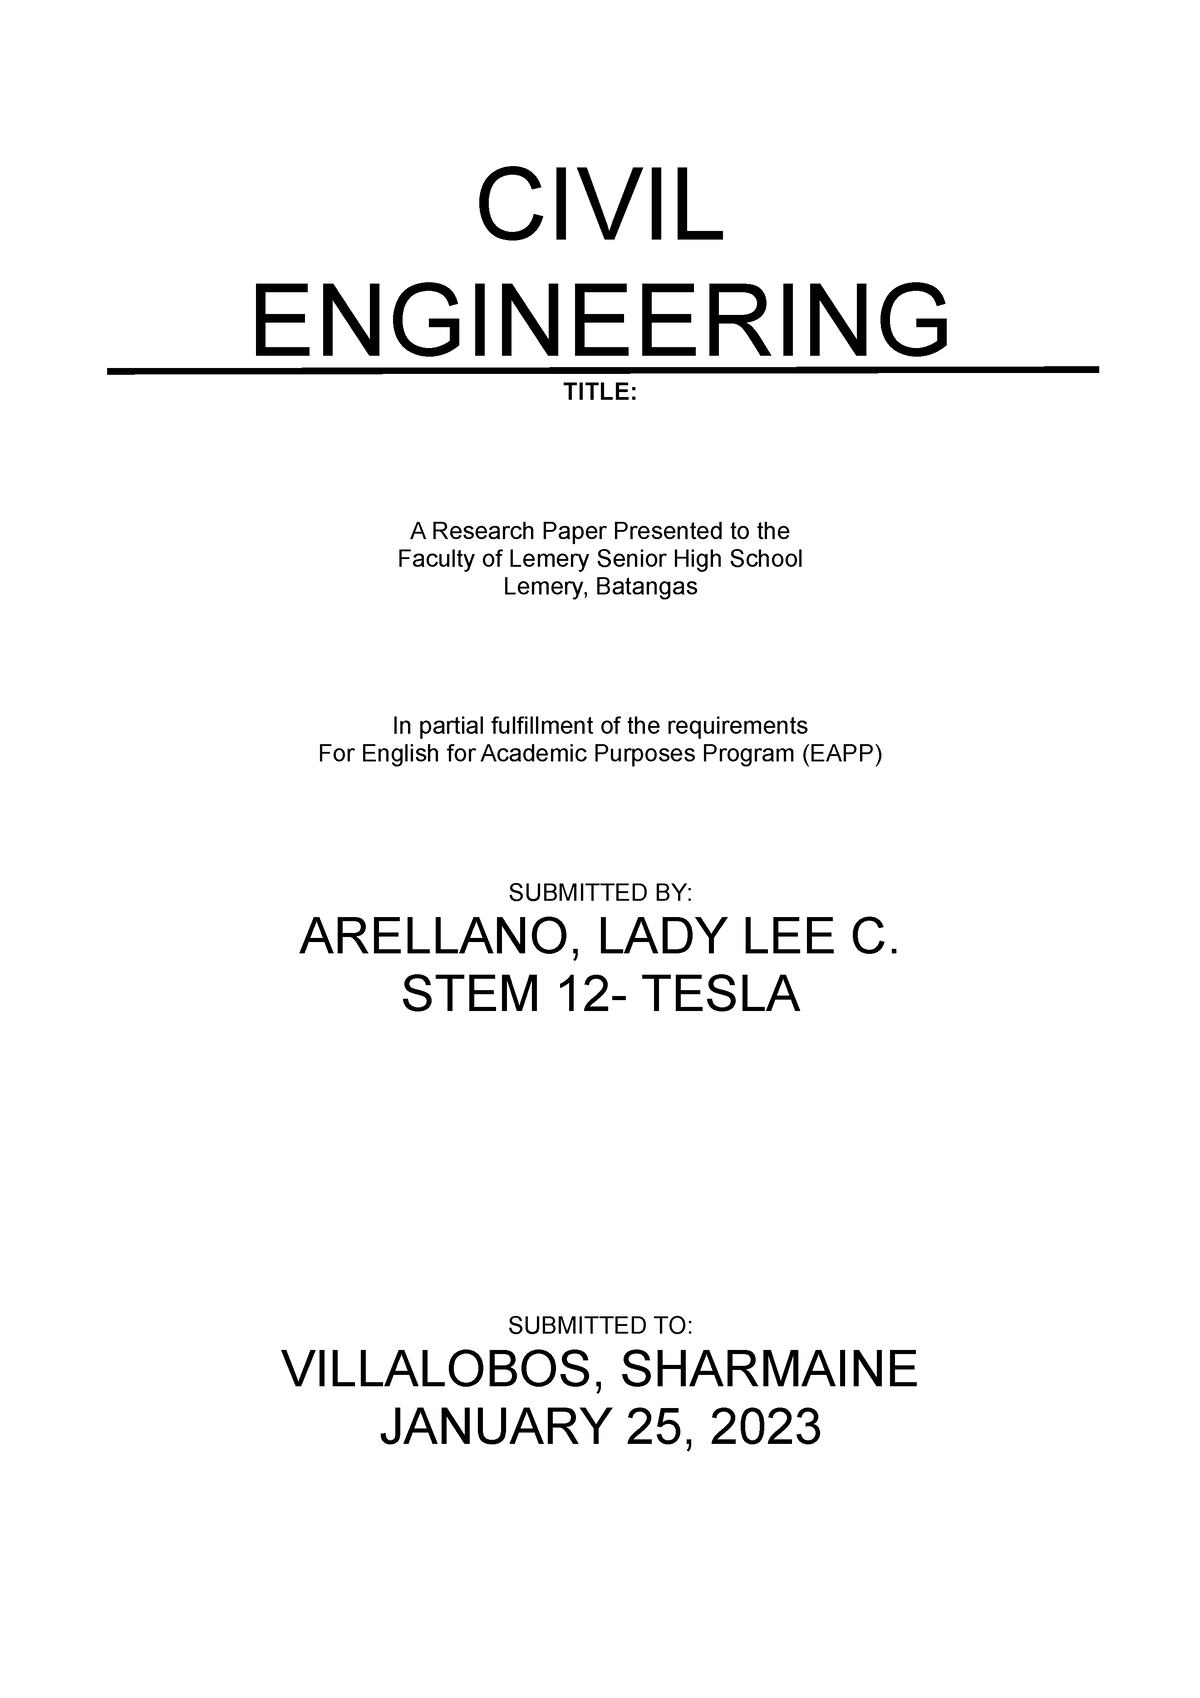 research paper civil engineering